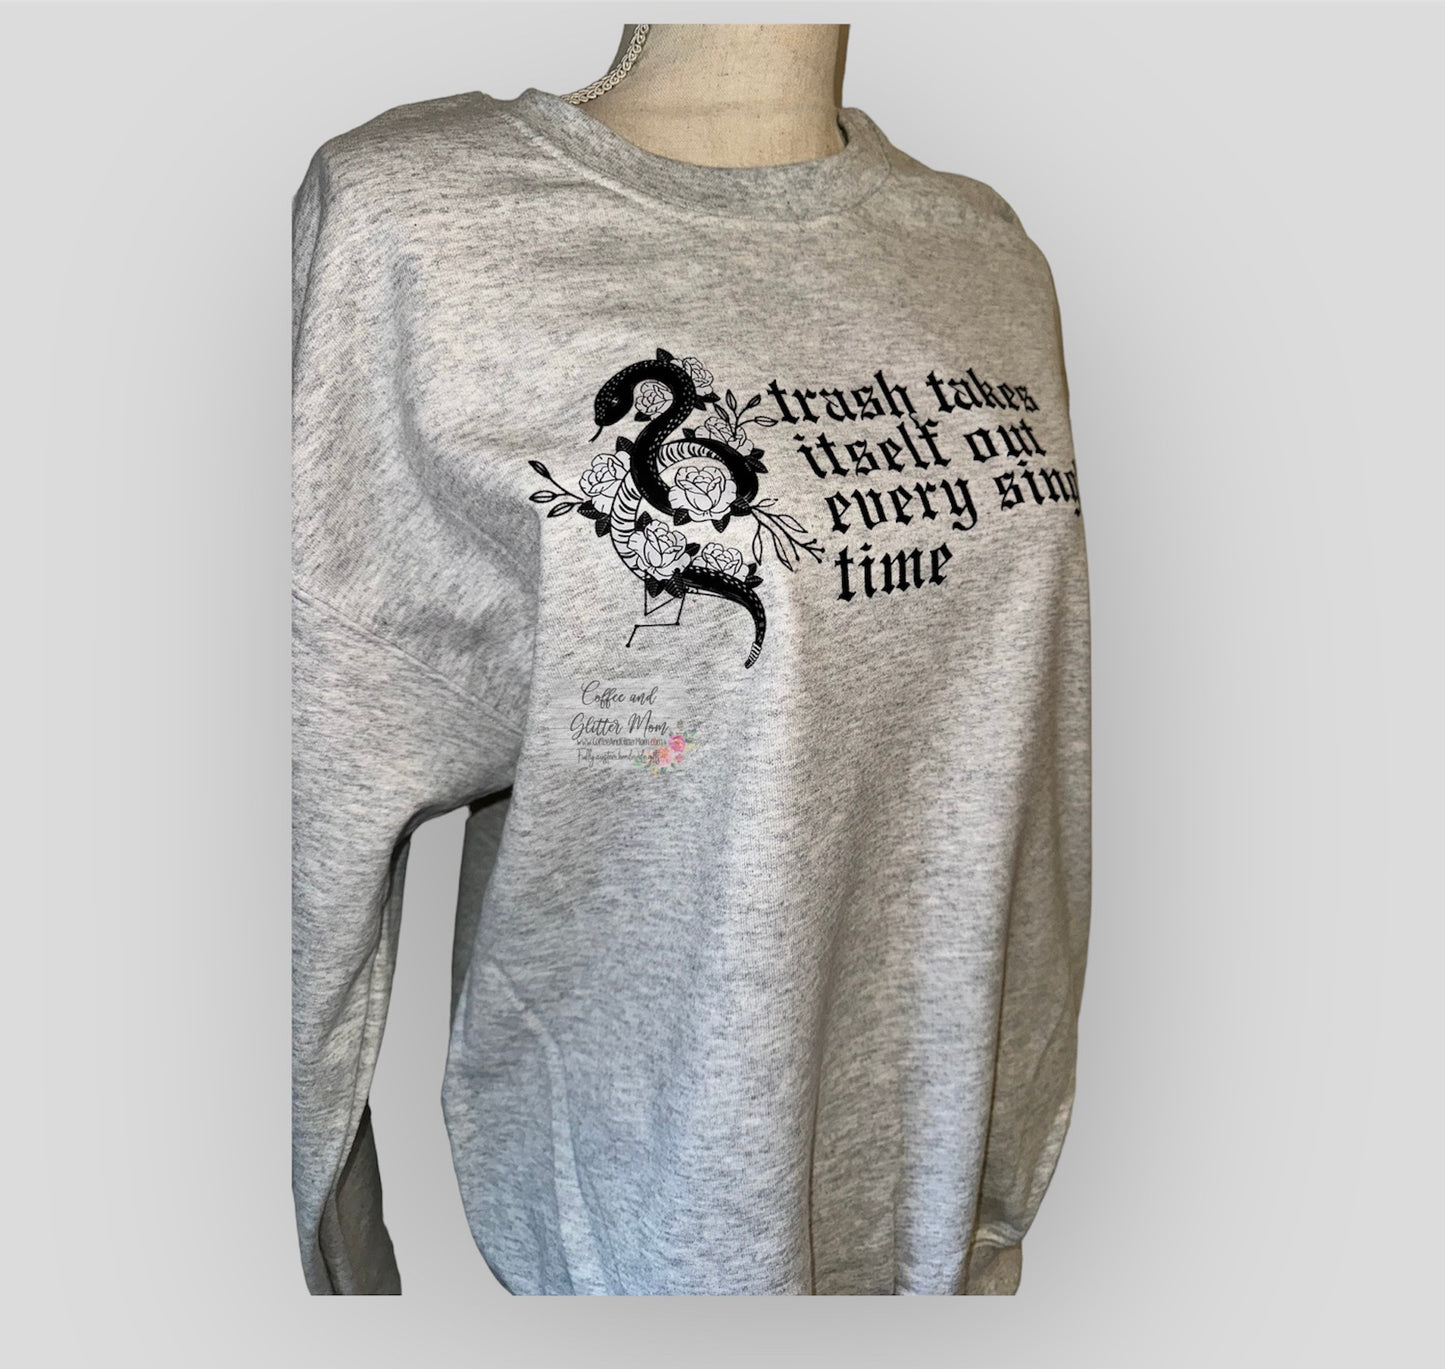 Trash Takes It's Self Out Adult Sweatshirt